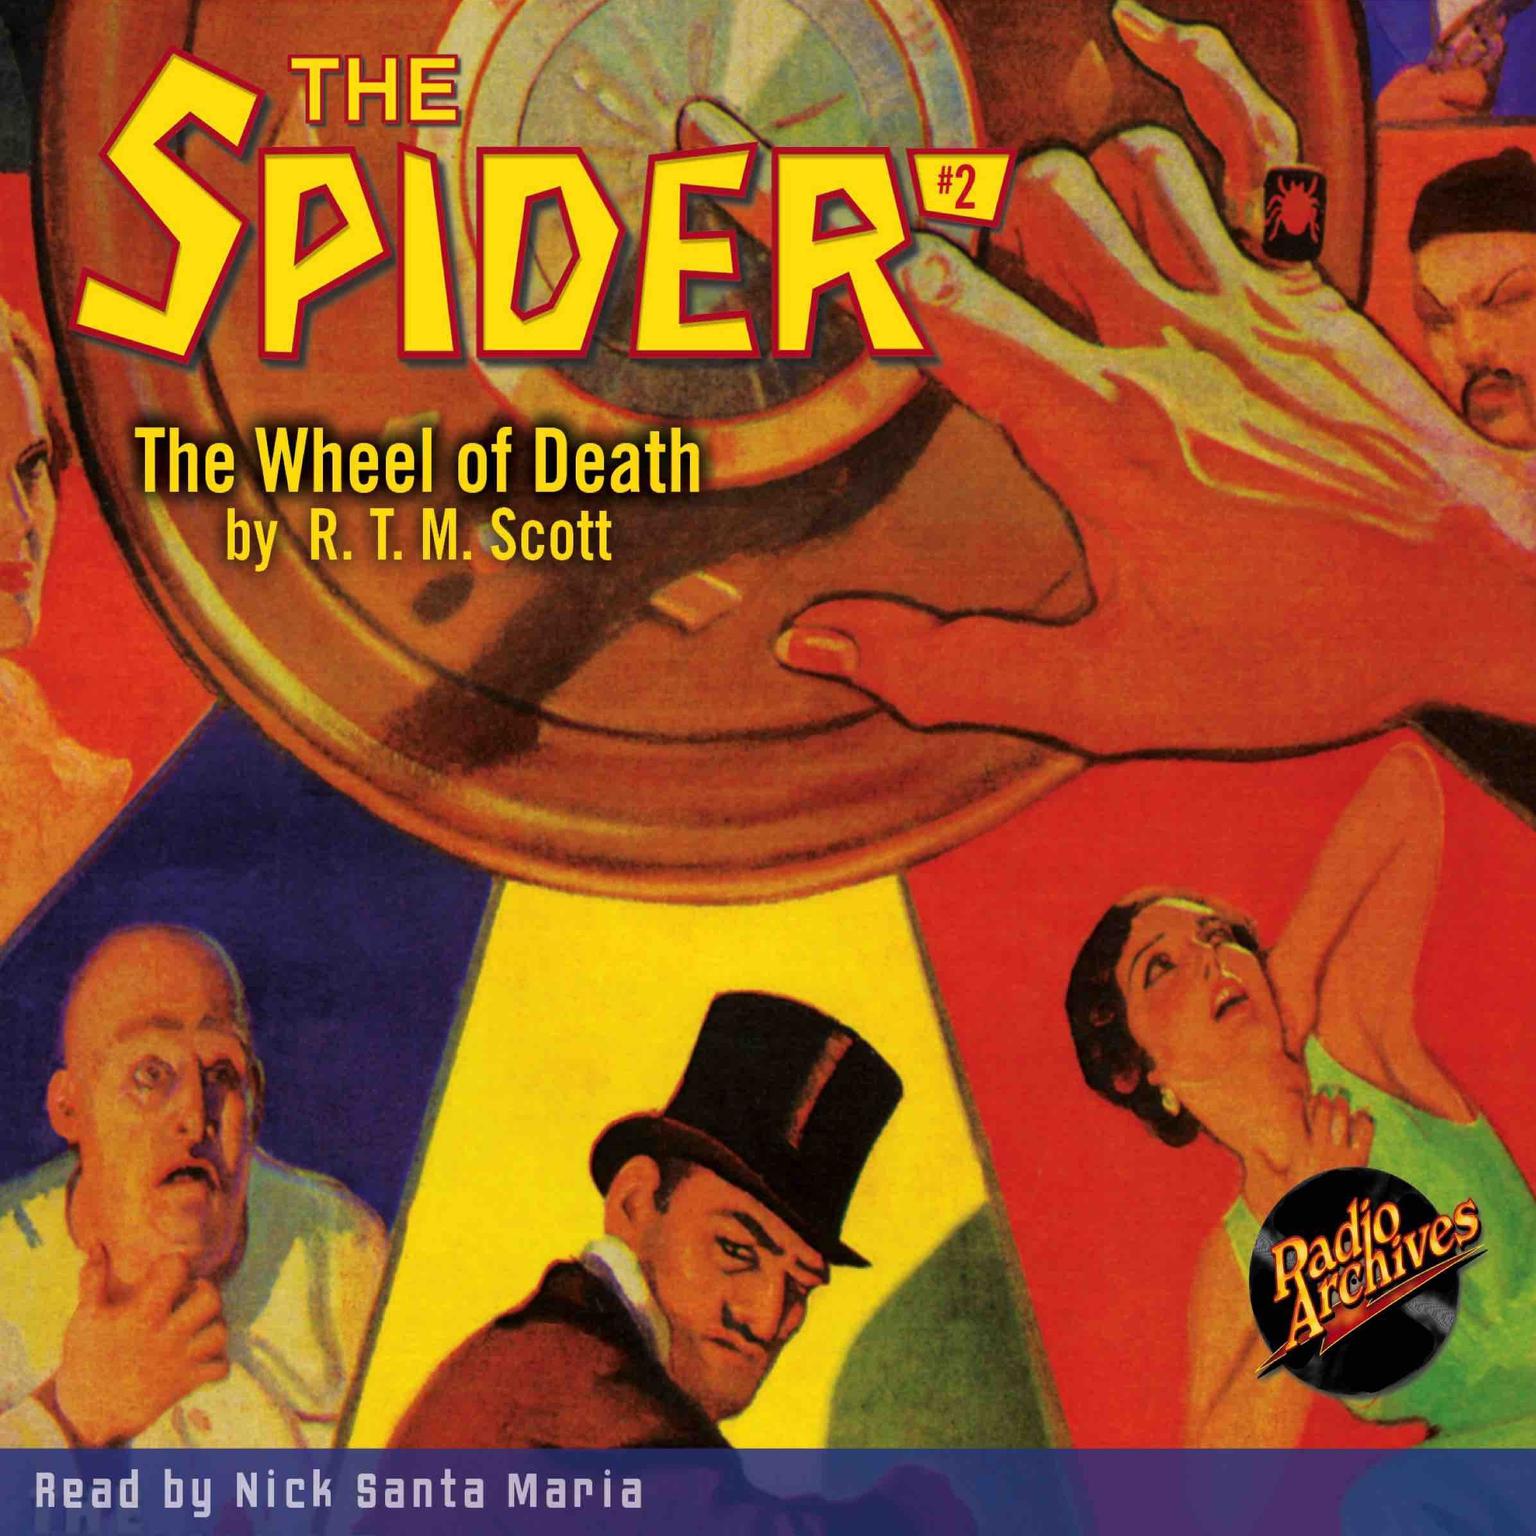 Spider #2, The: The Wheel of Death Audiobook, by R.T.M. Scott